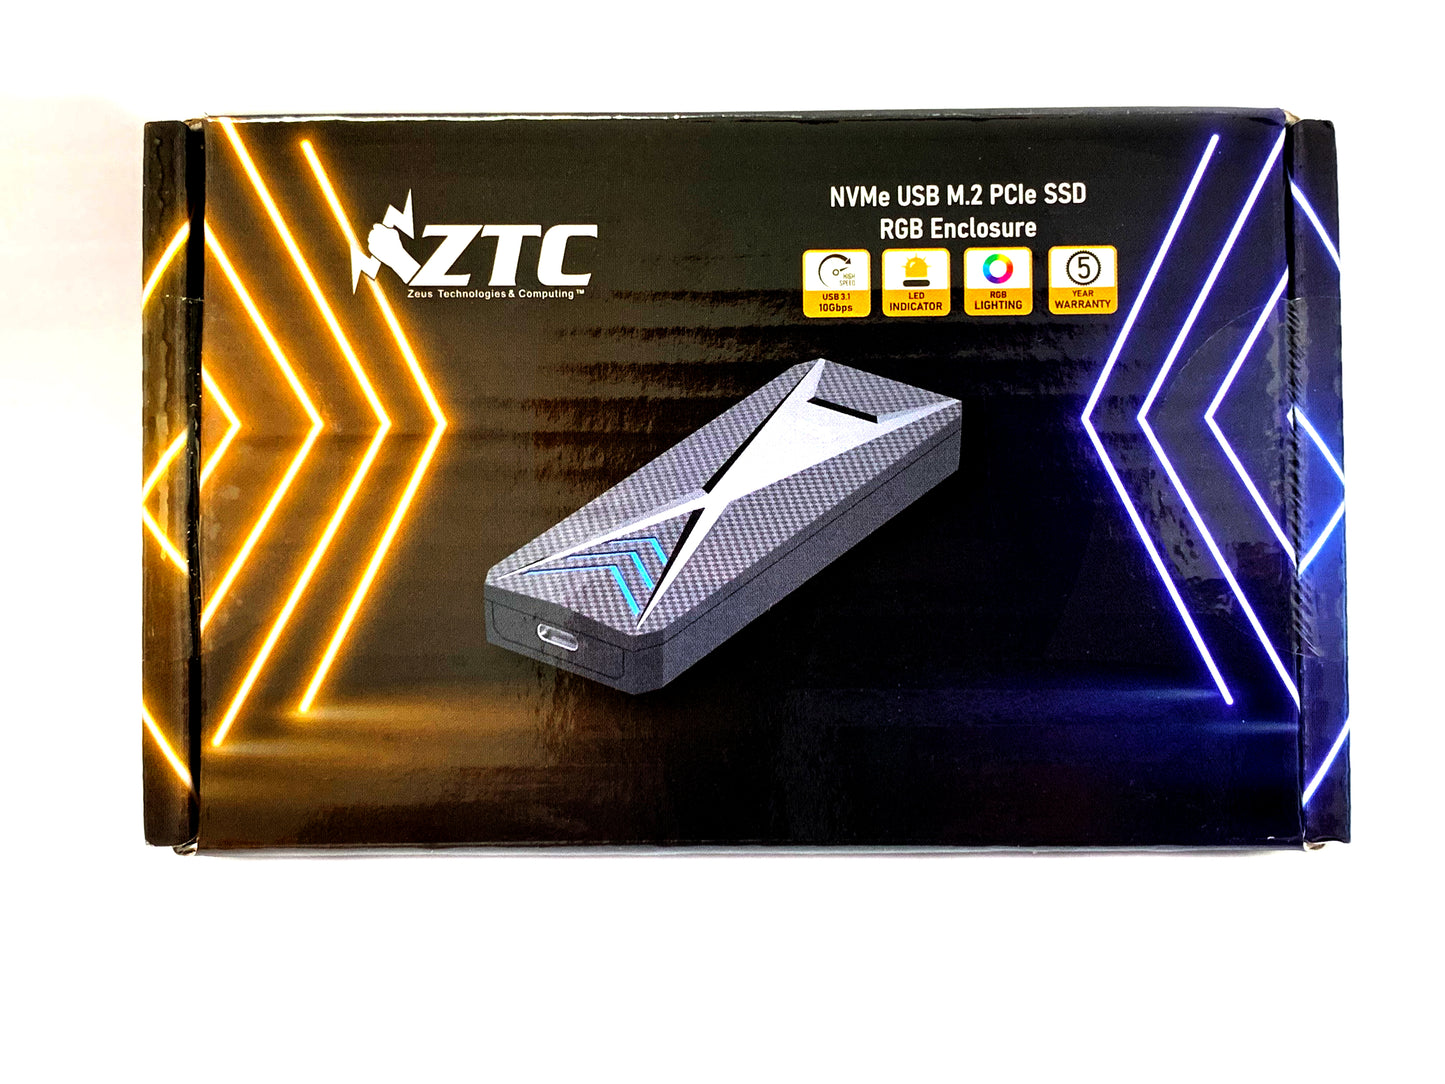 ZTC M.2 NVMe Tool-Free Portable Enclosure, RGB Lighting, Easy to use screwless design, USB-C 3.2 Gen 2 (10 Gbps) Supports M.2 PCIe NVMe SSD 2230/2242/2260/2280 Model ZTC-EN013